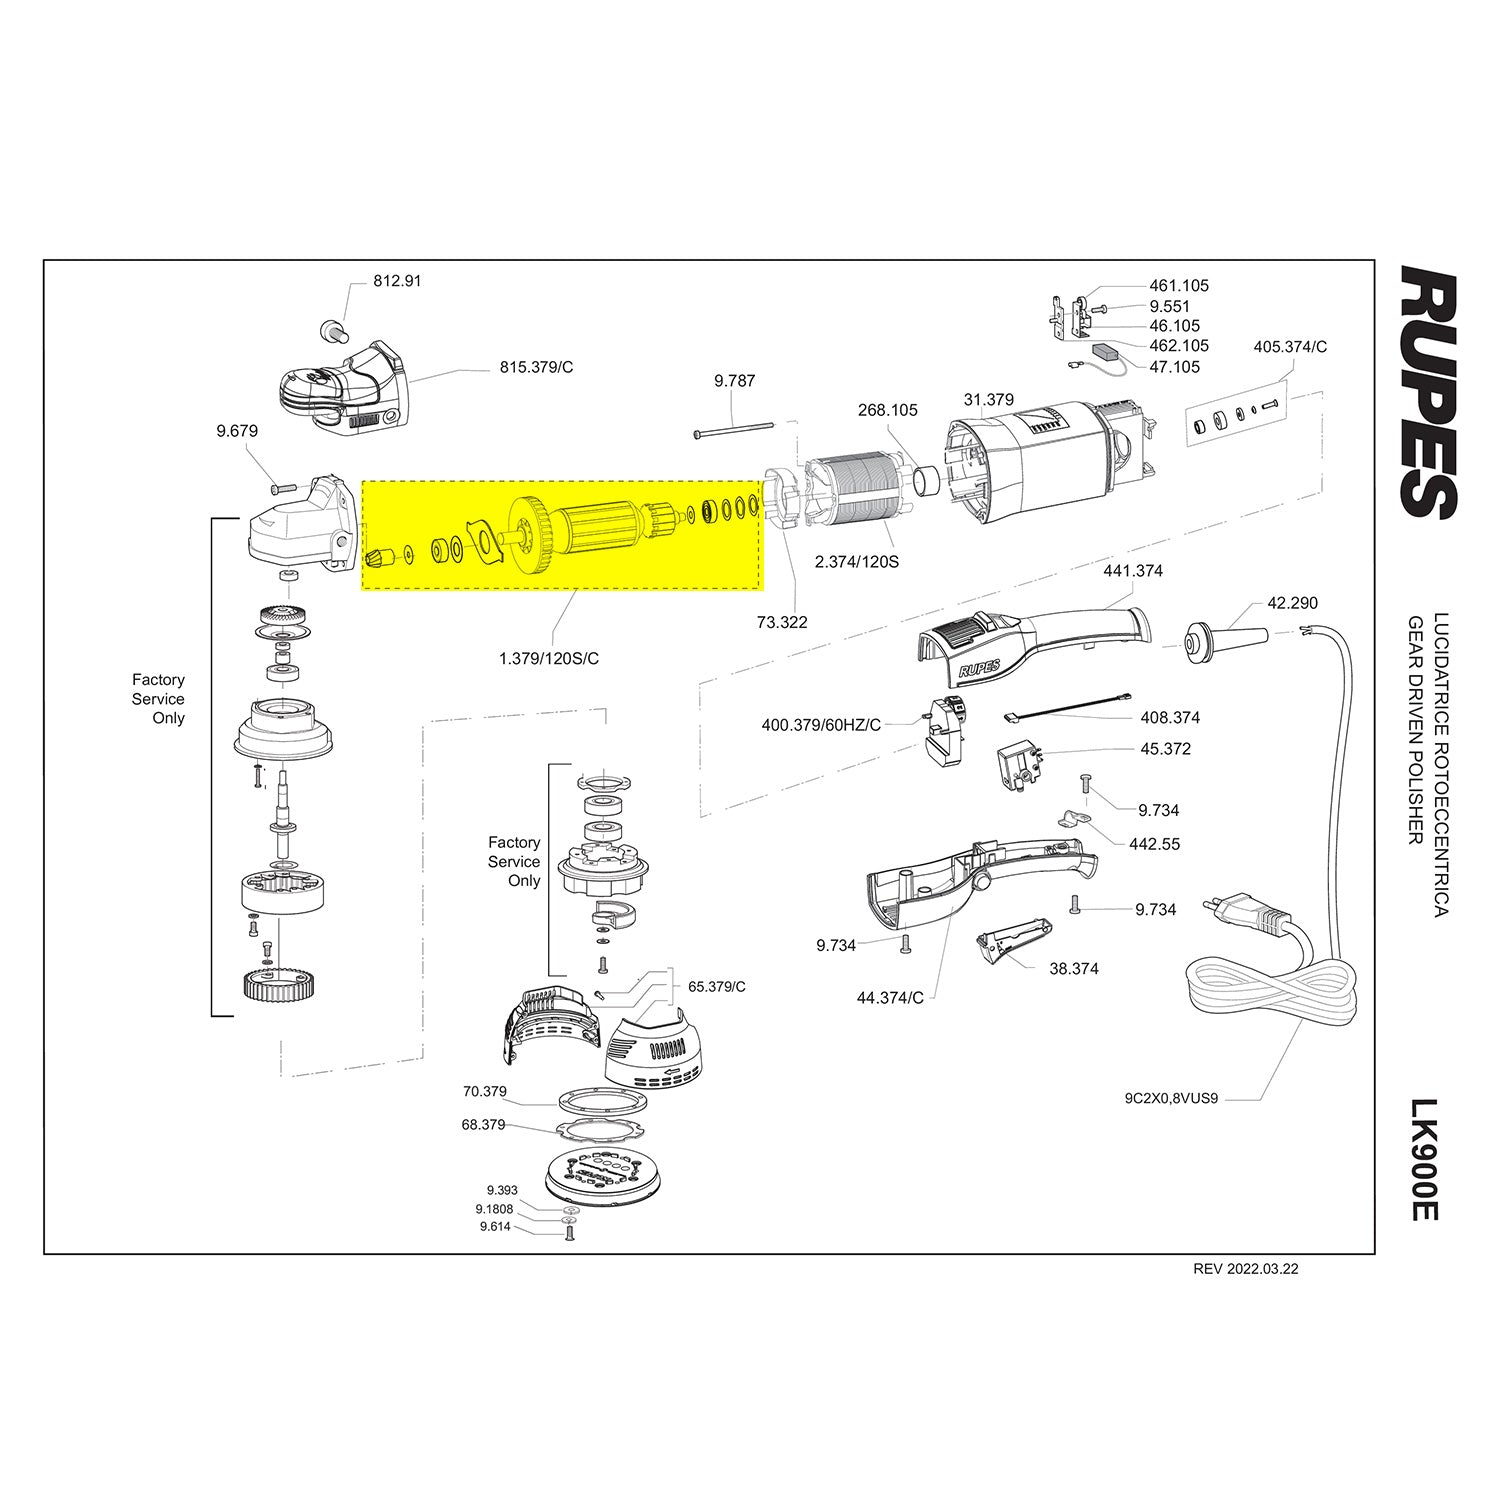 rotor-assembly-lk900e-parts-guide